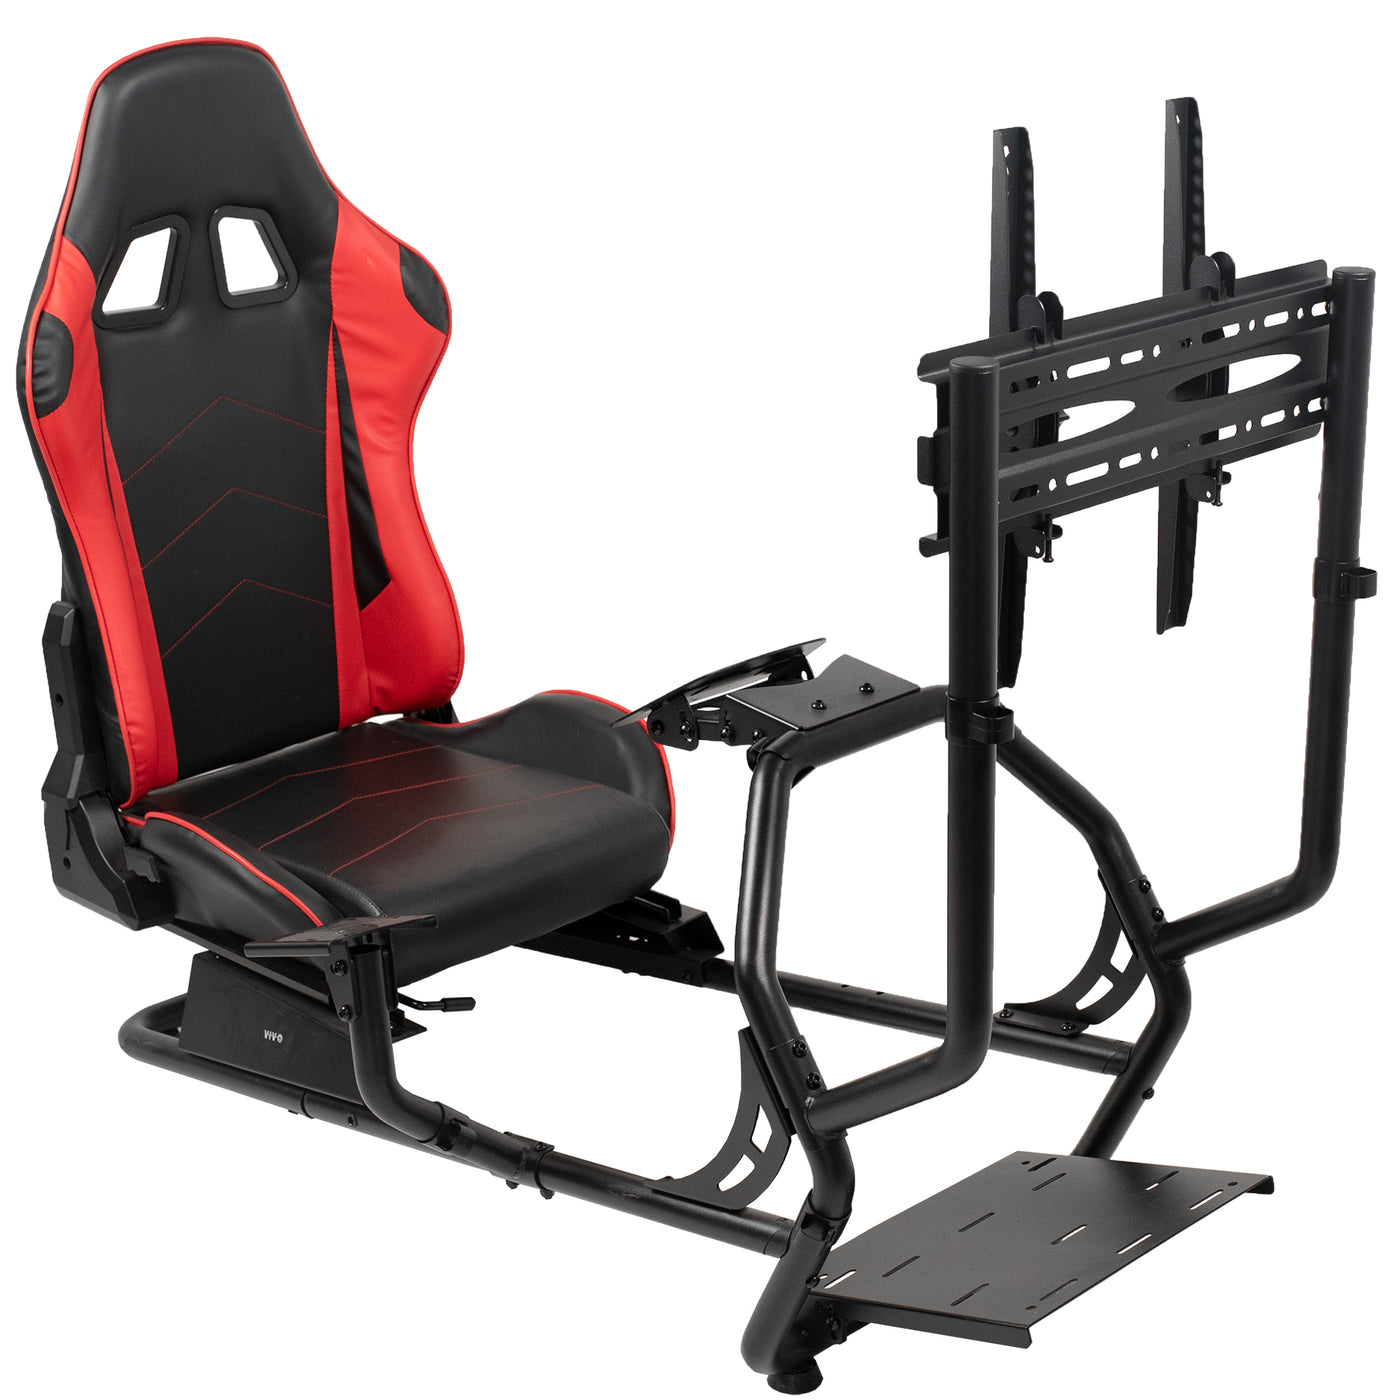 Racing gaming setup with red and black racing chair TV mount combination.